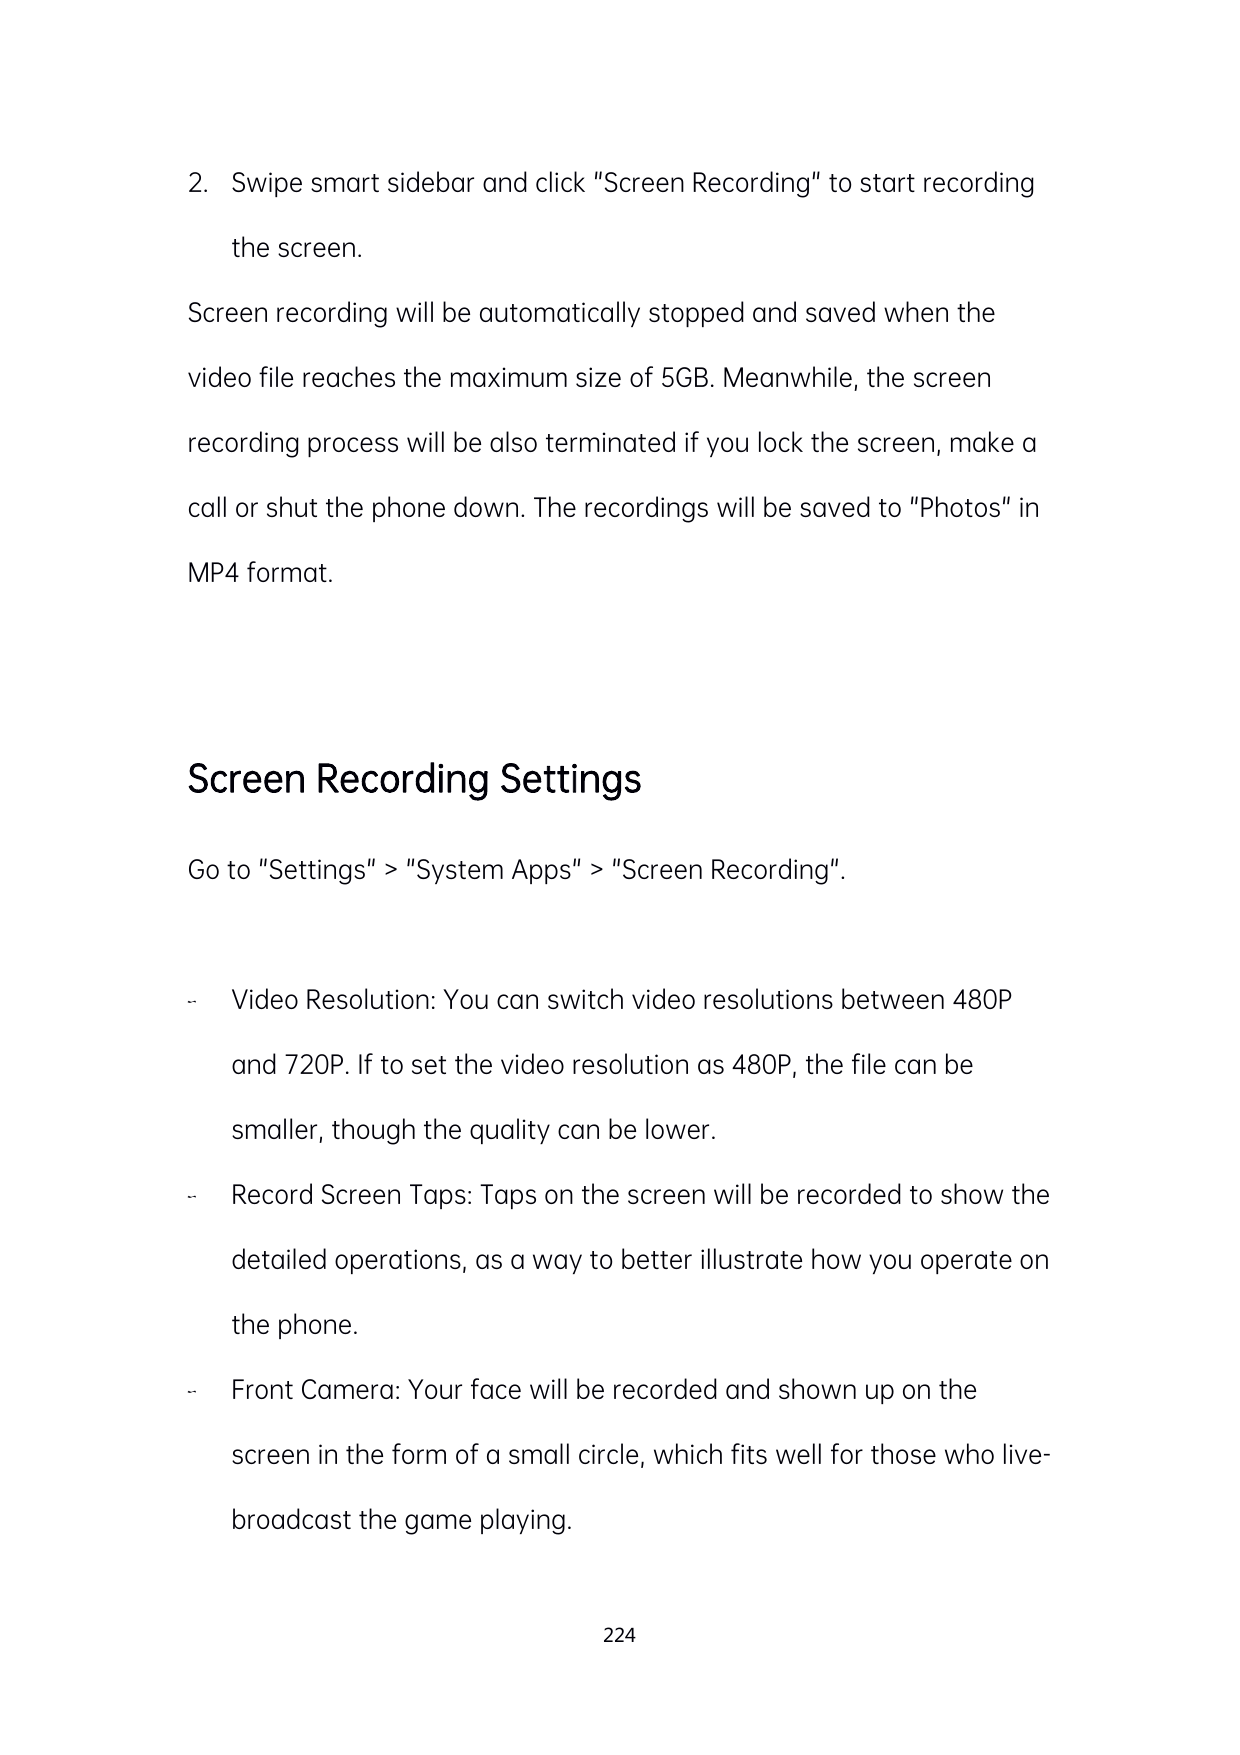 2. Swipe smart sidebar and click "Screen Recording" to start recordingthe screen.Screen recording will be automatically stopped 